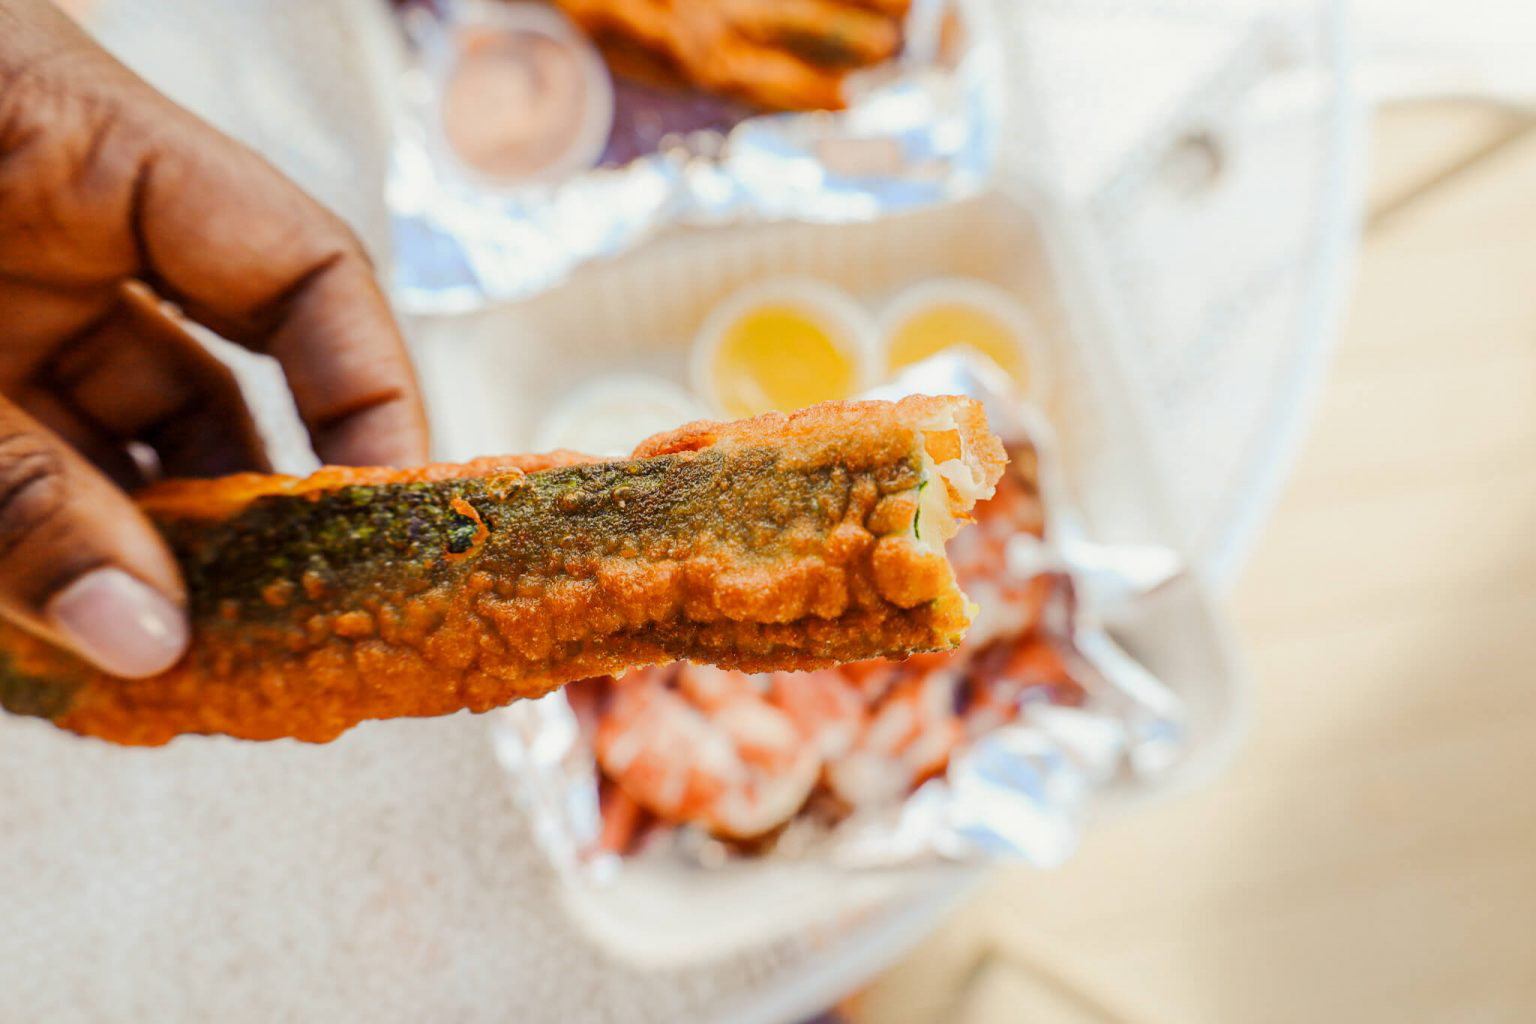 A person holding a fried zucchini.